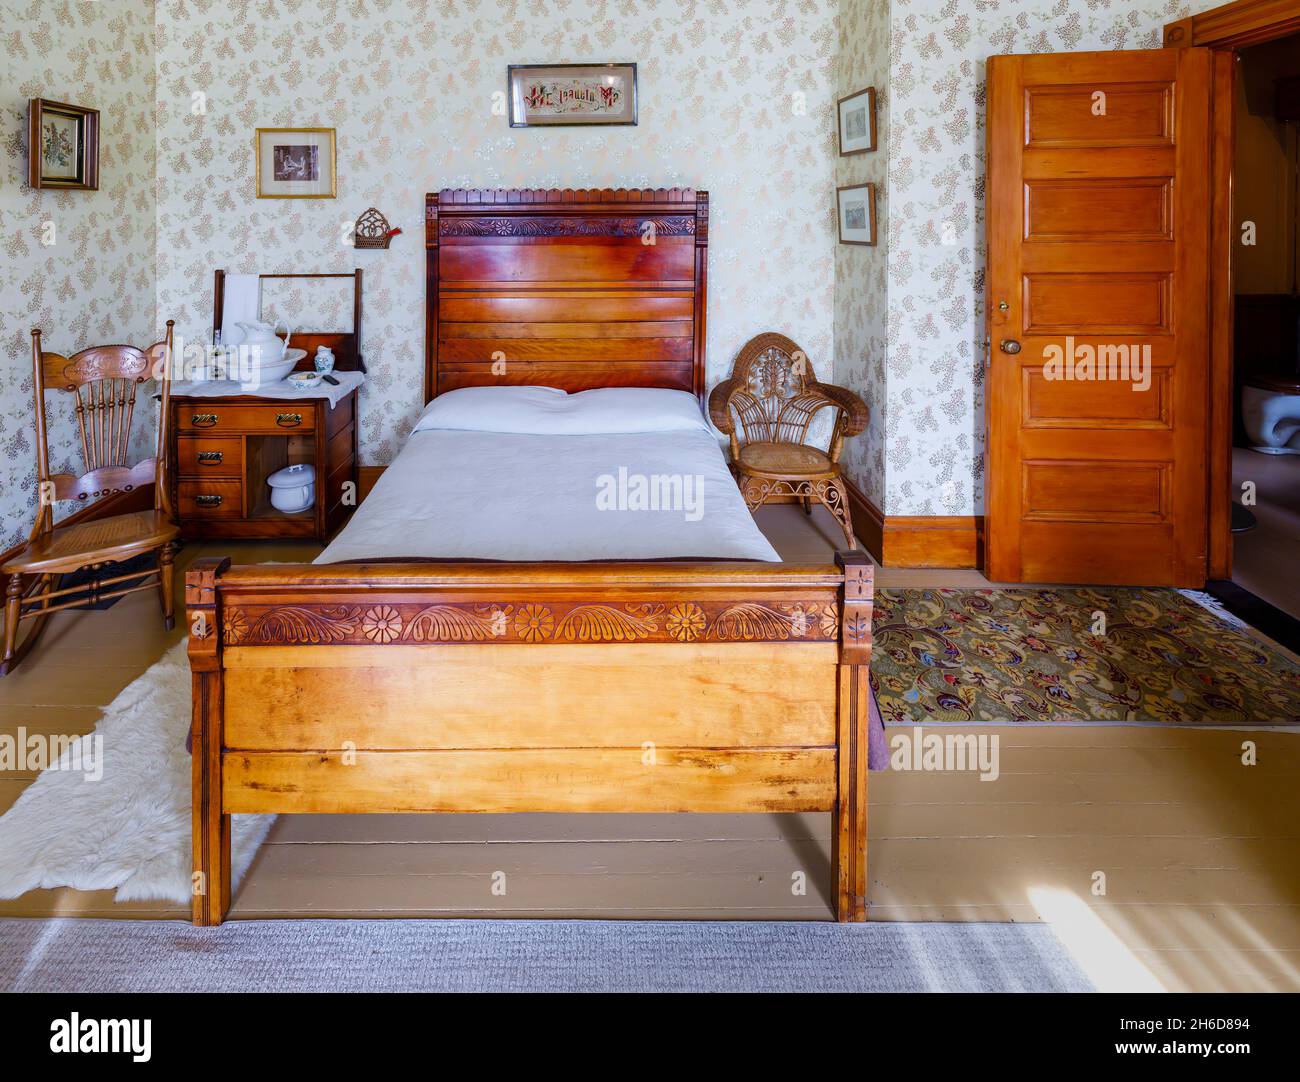 Traditional 19th century bedroom and carved wooden double bed in the museum at Billings Farm & Museum, Woodstock, Vermont, New England, USA Stock Photo